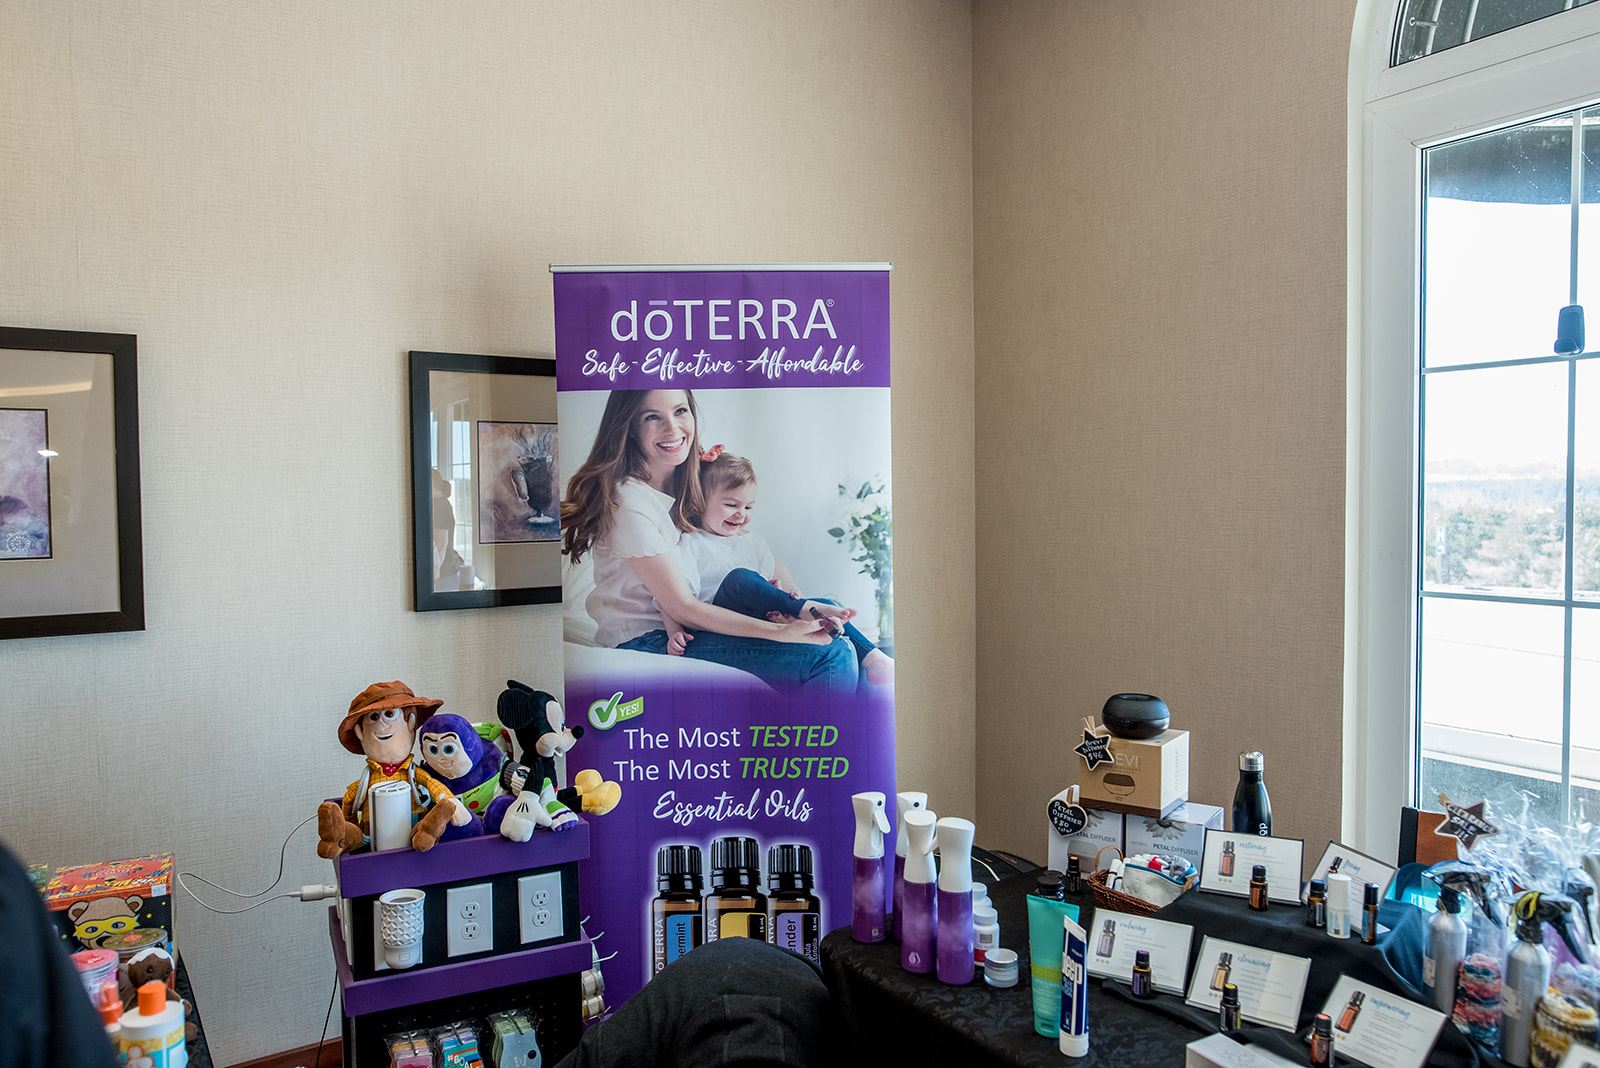 Vendor table for doTerra at the 2020 International Women's Day Celebration Luncheon.